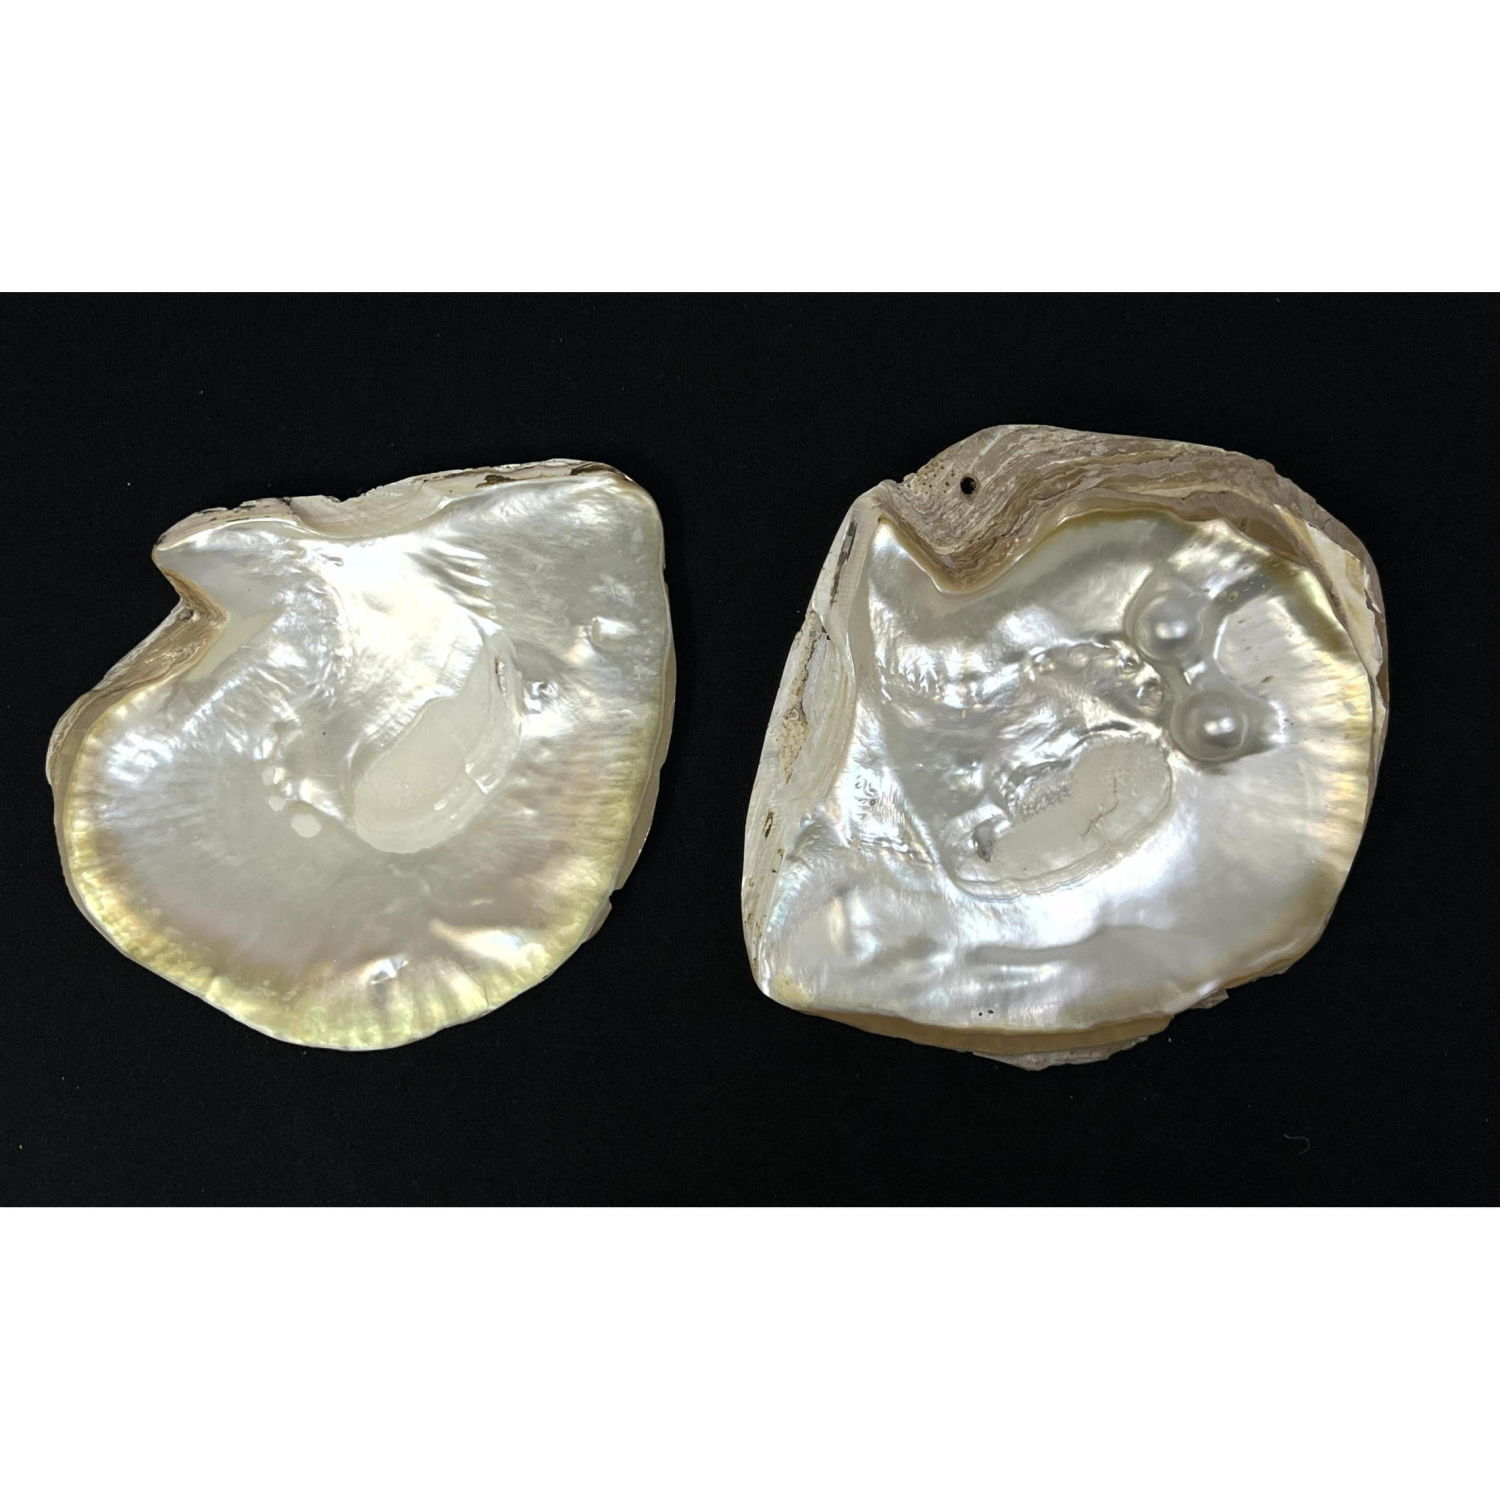 2pc Half Shells with Lovely Nacre